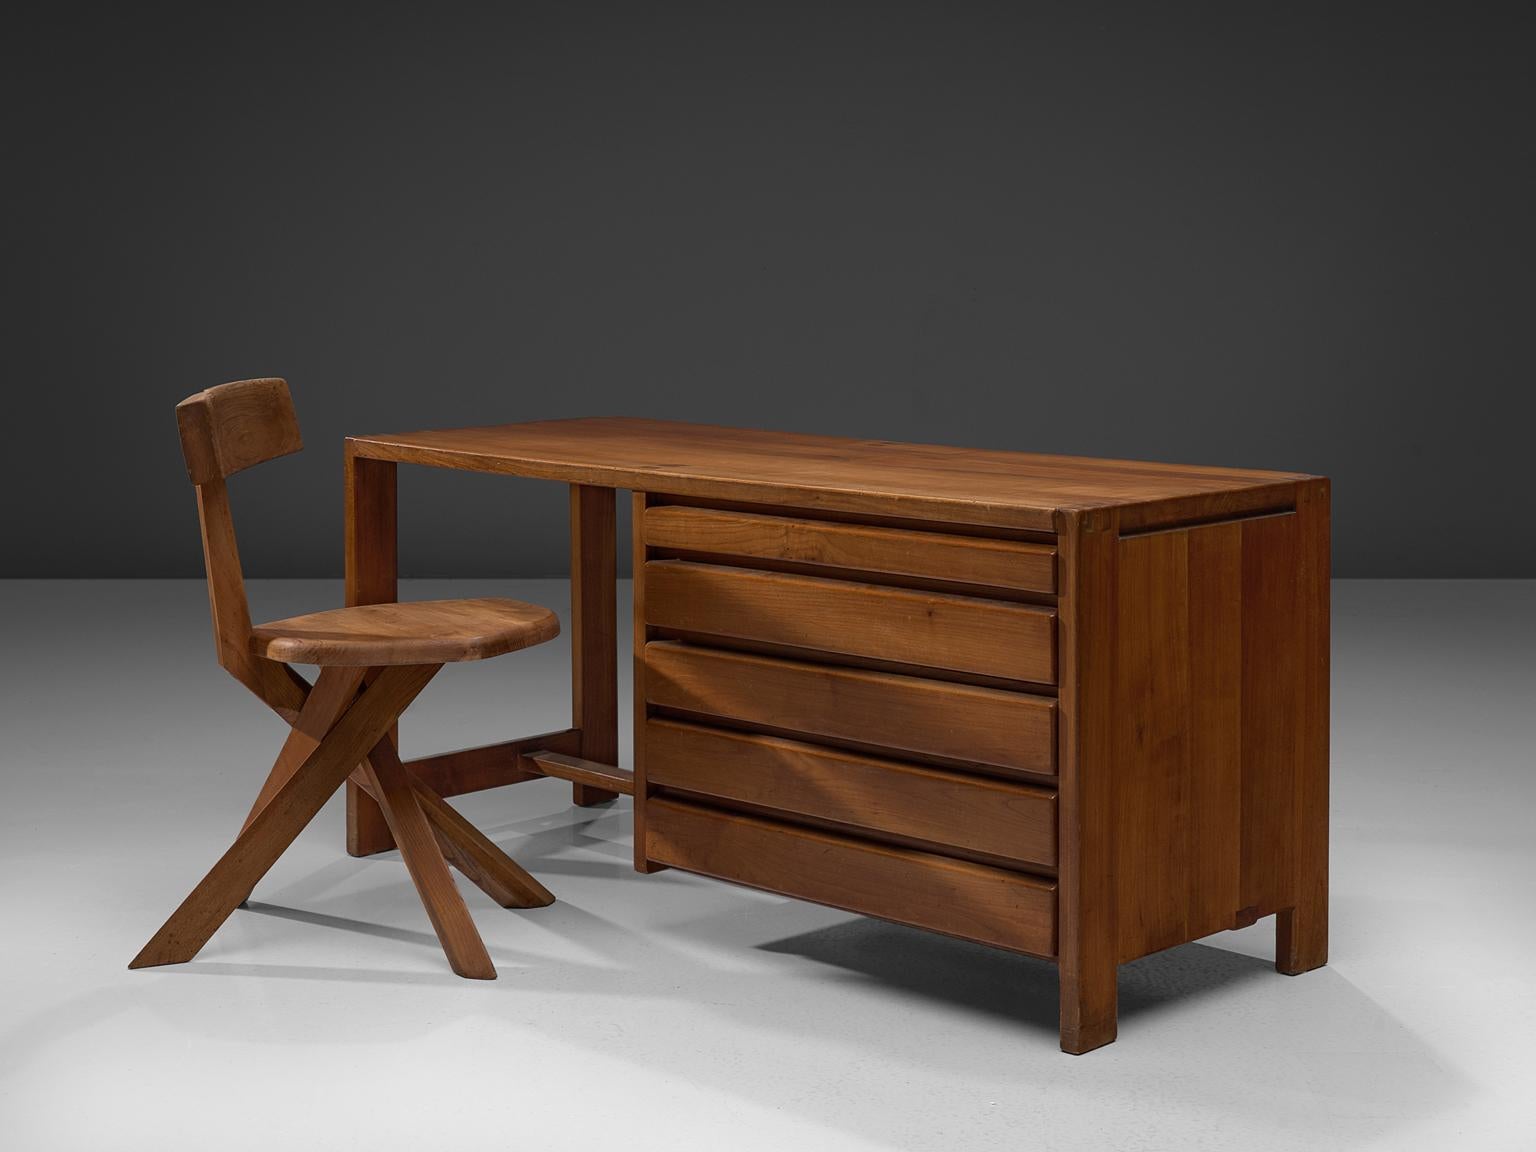 Pierre Chapo, dressing table R05, elm, circa 1960.

This exquisitely crafted credenza combines a simplified yet complex design combined with nifty, solid construction details that characterize Chapo's work. The dressing table has seven drawers.